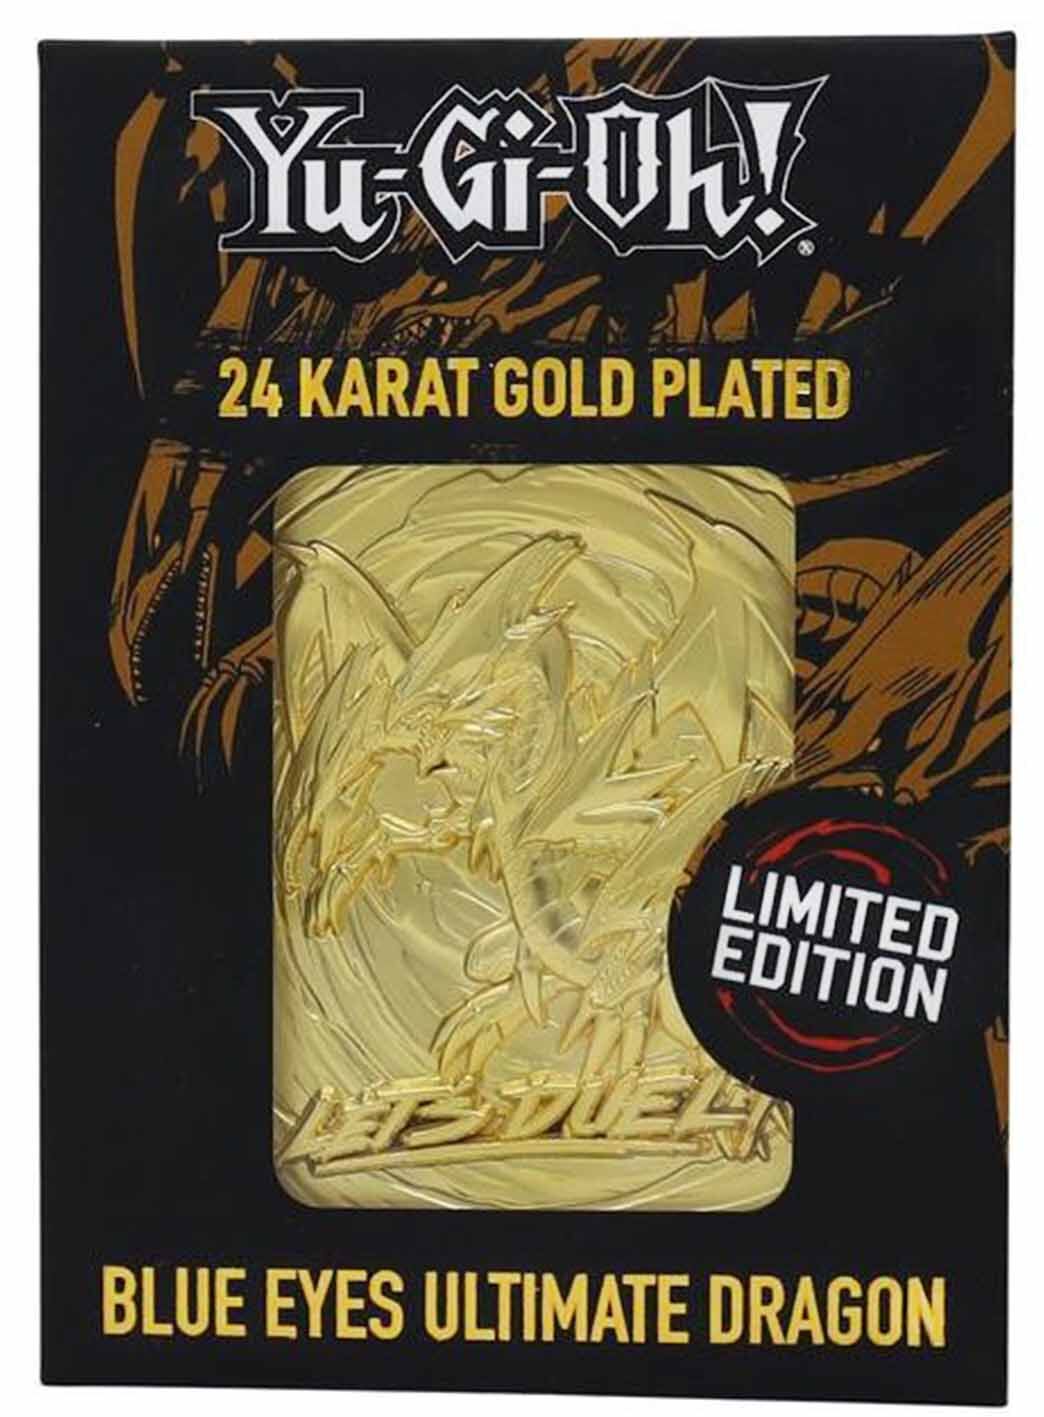 Yu-Gi-Oh! Blue Eyes Ultimate Dragon 24k Gold Plated Limited Edition Card